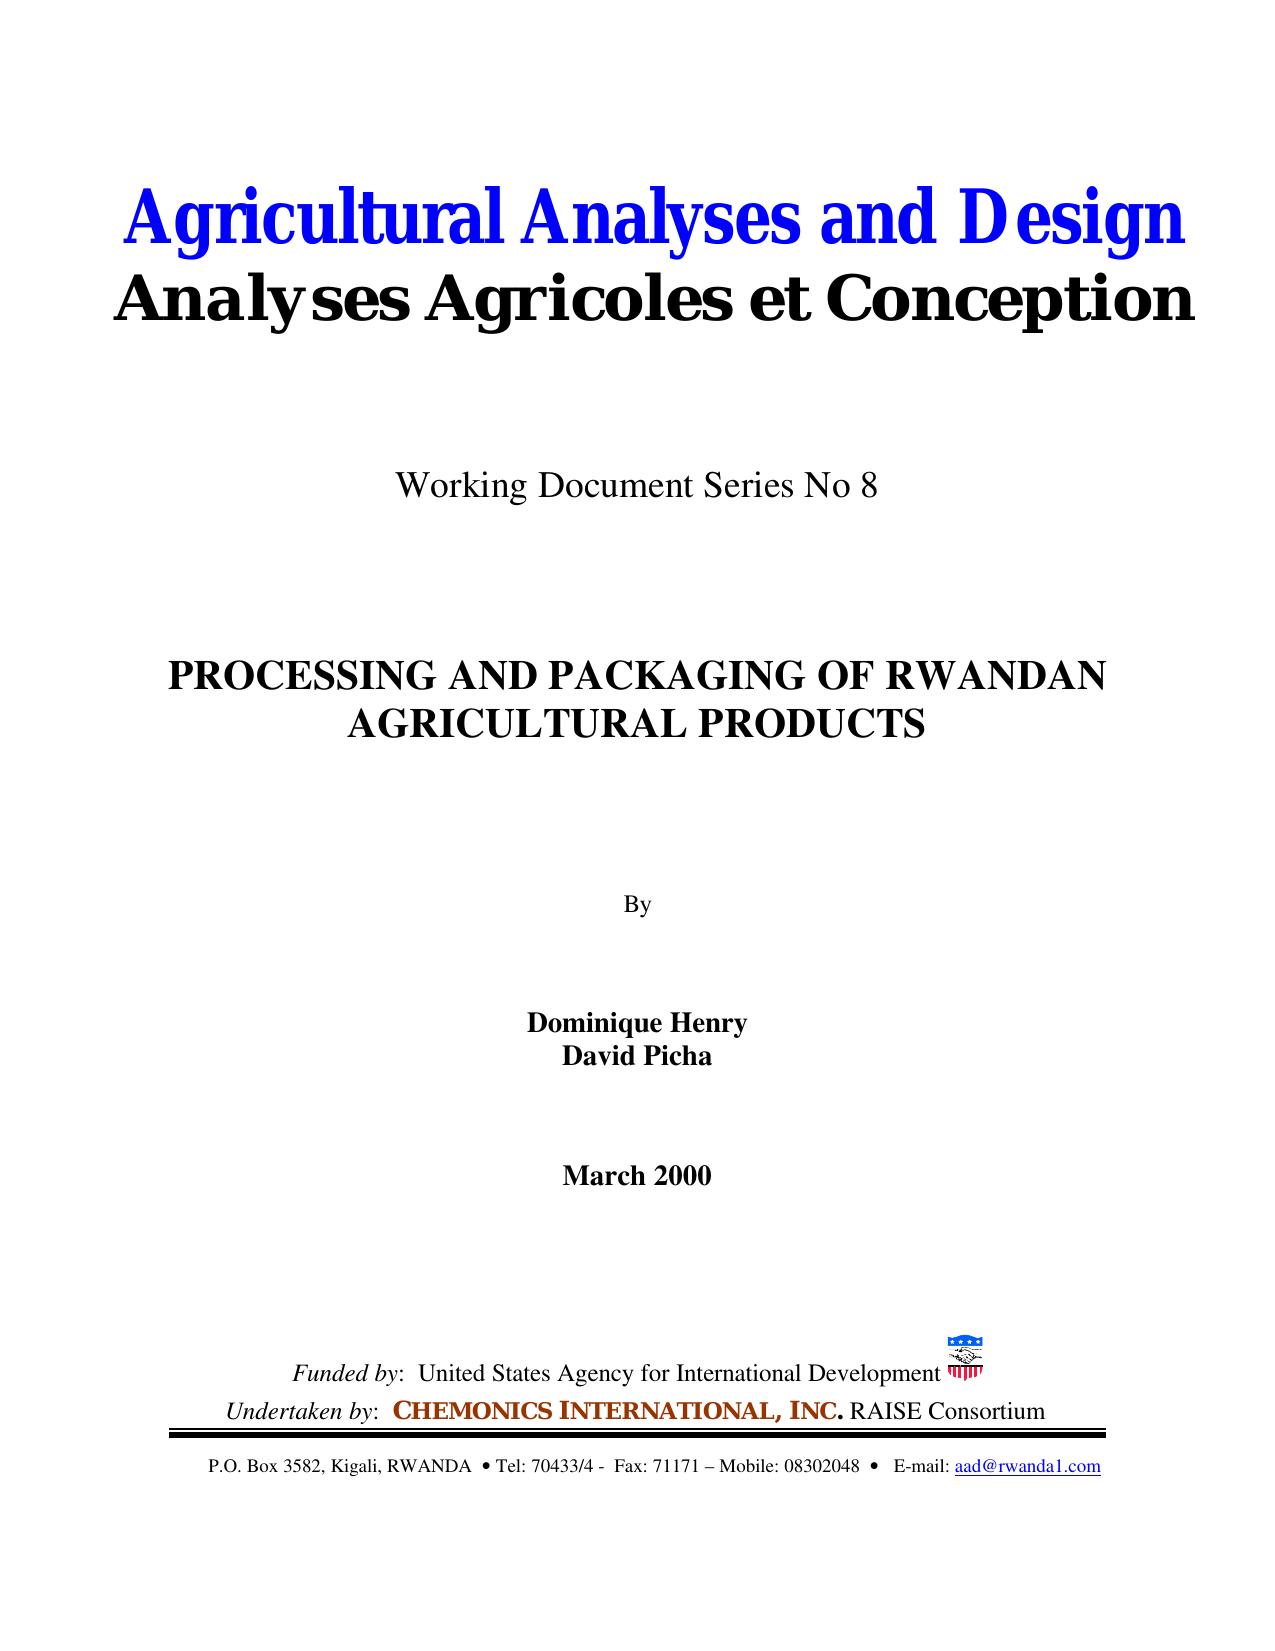 Processing and Packaging.PDF